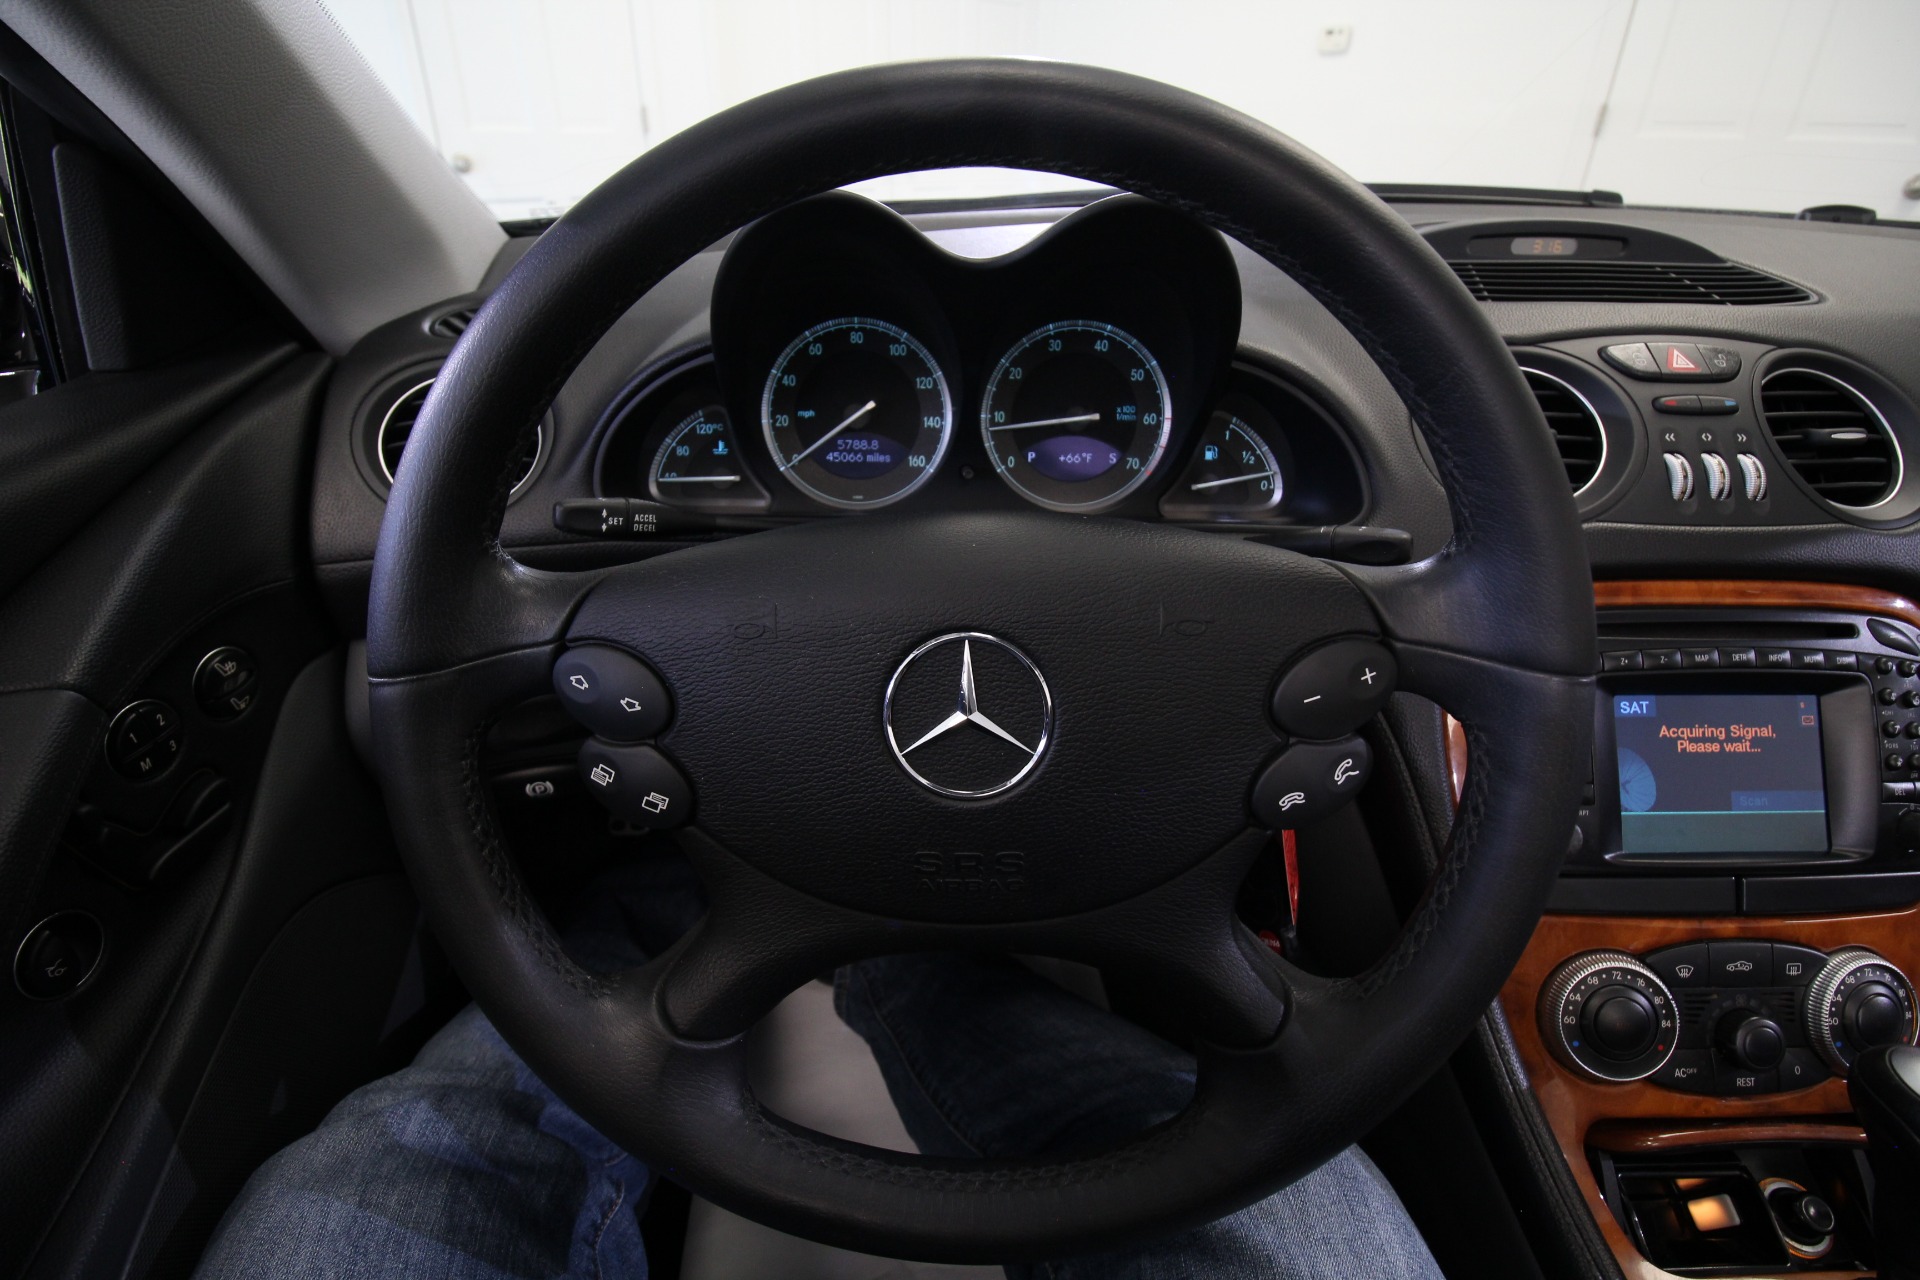 Used 2004 BLACK Mercedes-Benz SL-Class SL500 LOCAL CAR EXTENSIVE SERVICE HISTORY LIKE NEW | Albany, NY